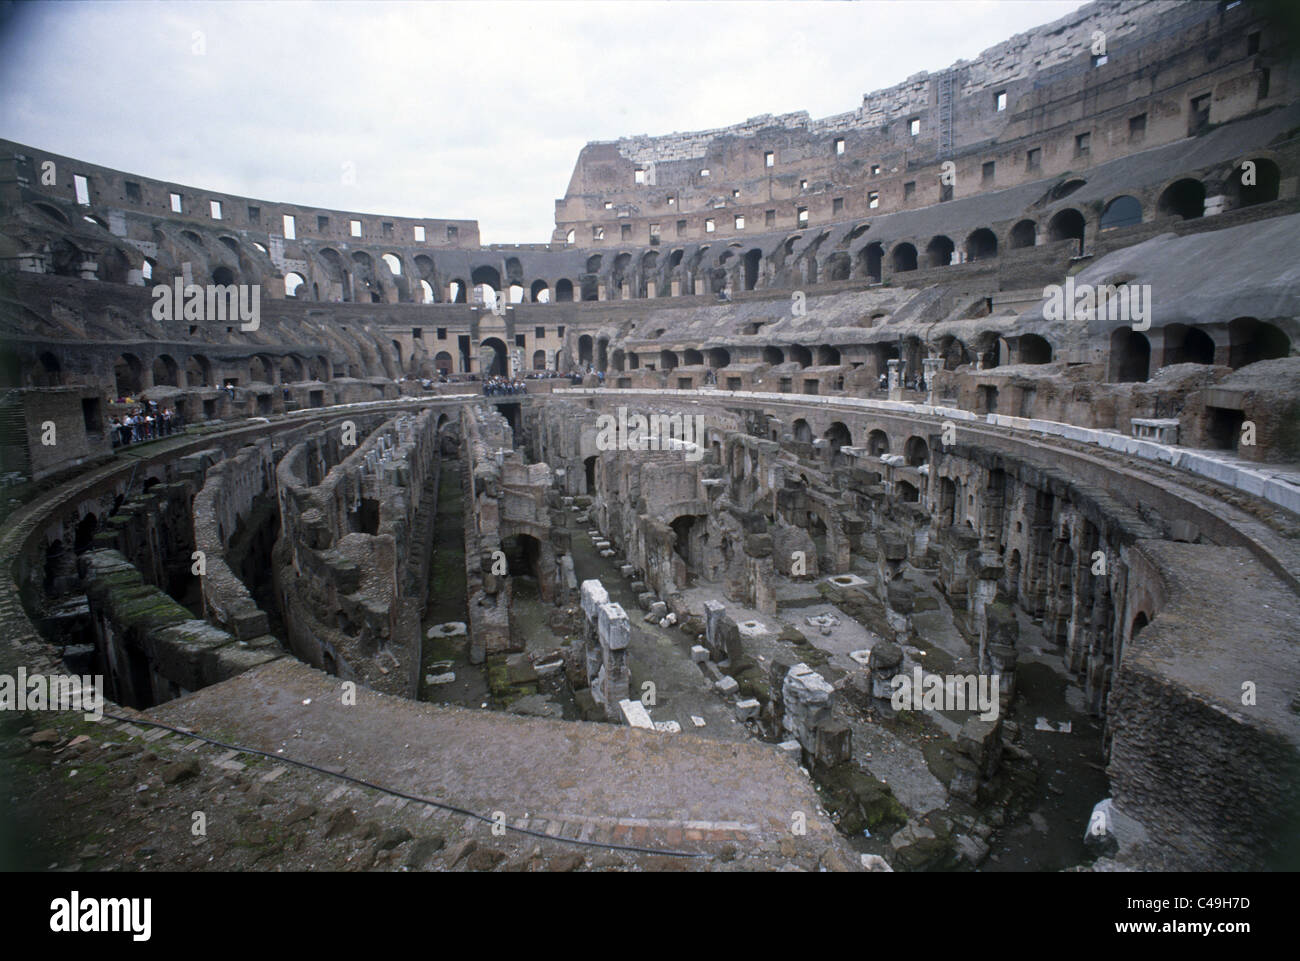 Photograph of the ruins of the Roman Coliseum in Rome Stock Photo